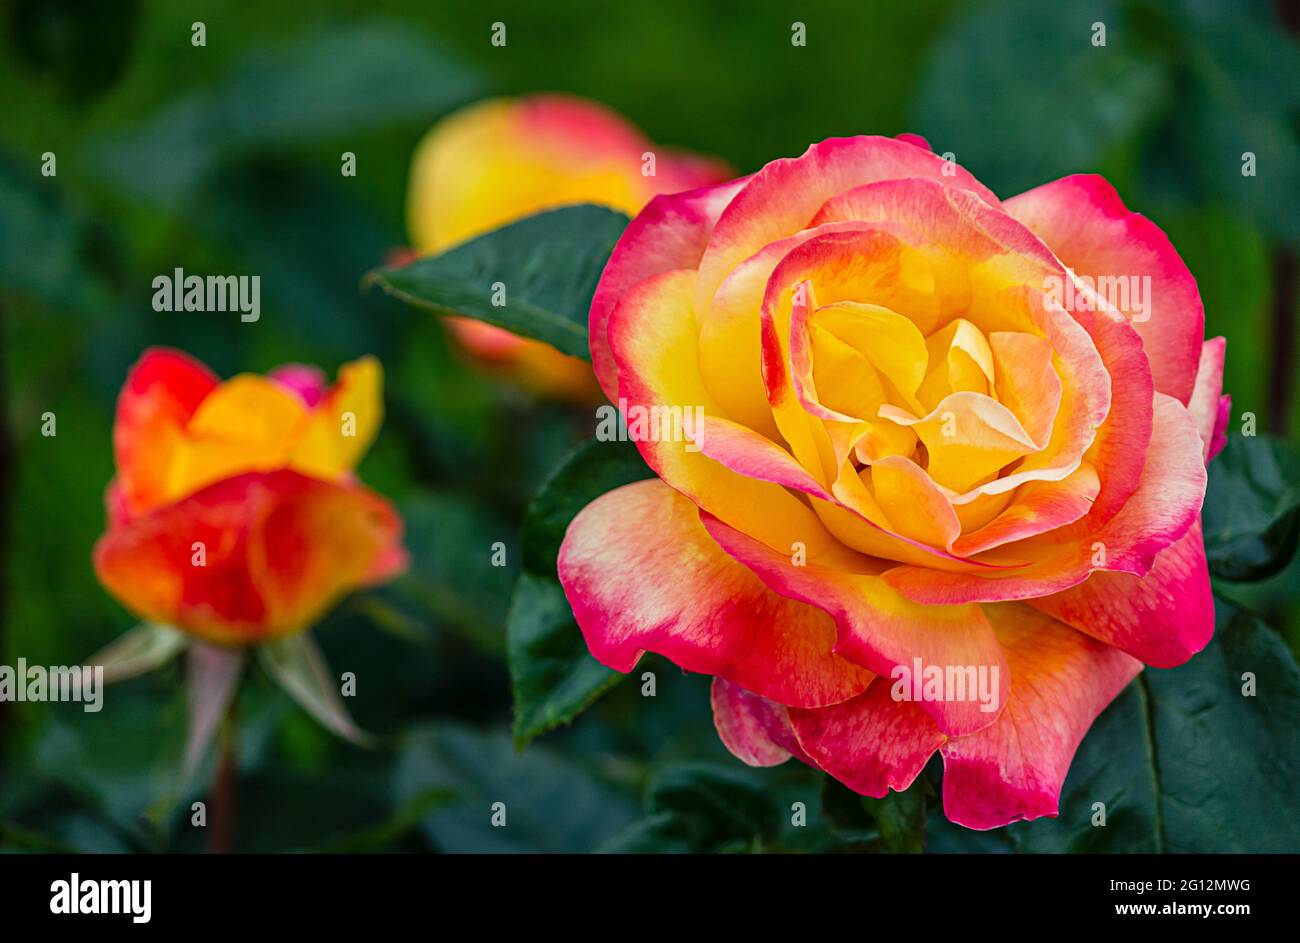 Beautiful yellow and pink climbing rose in a garden Stock Photo